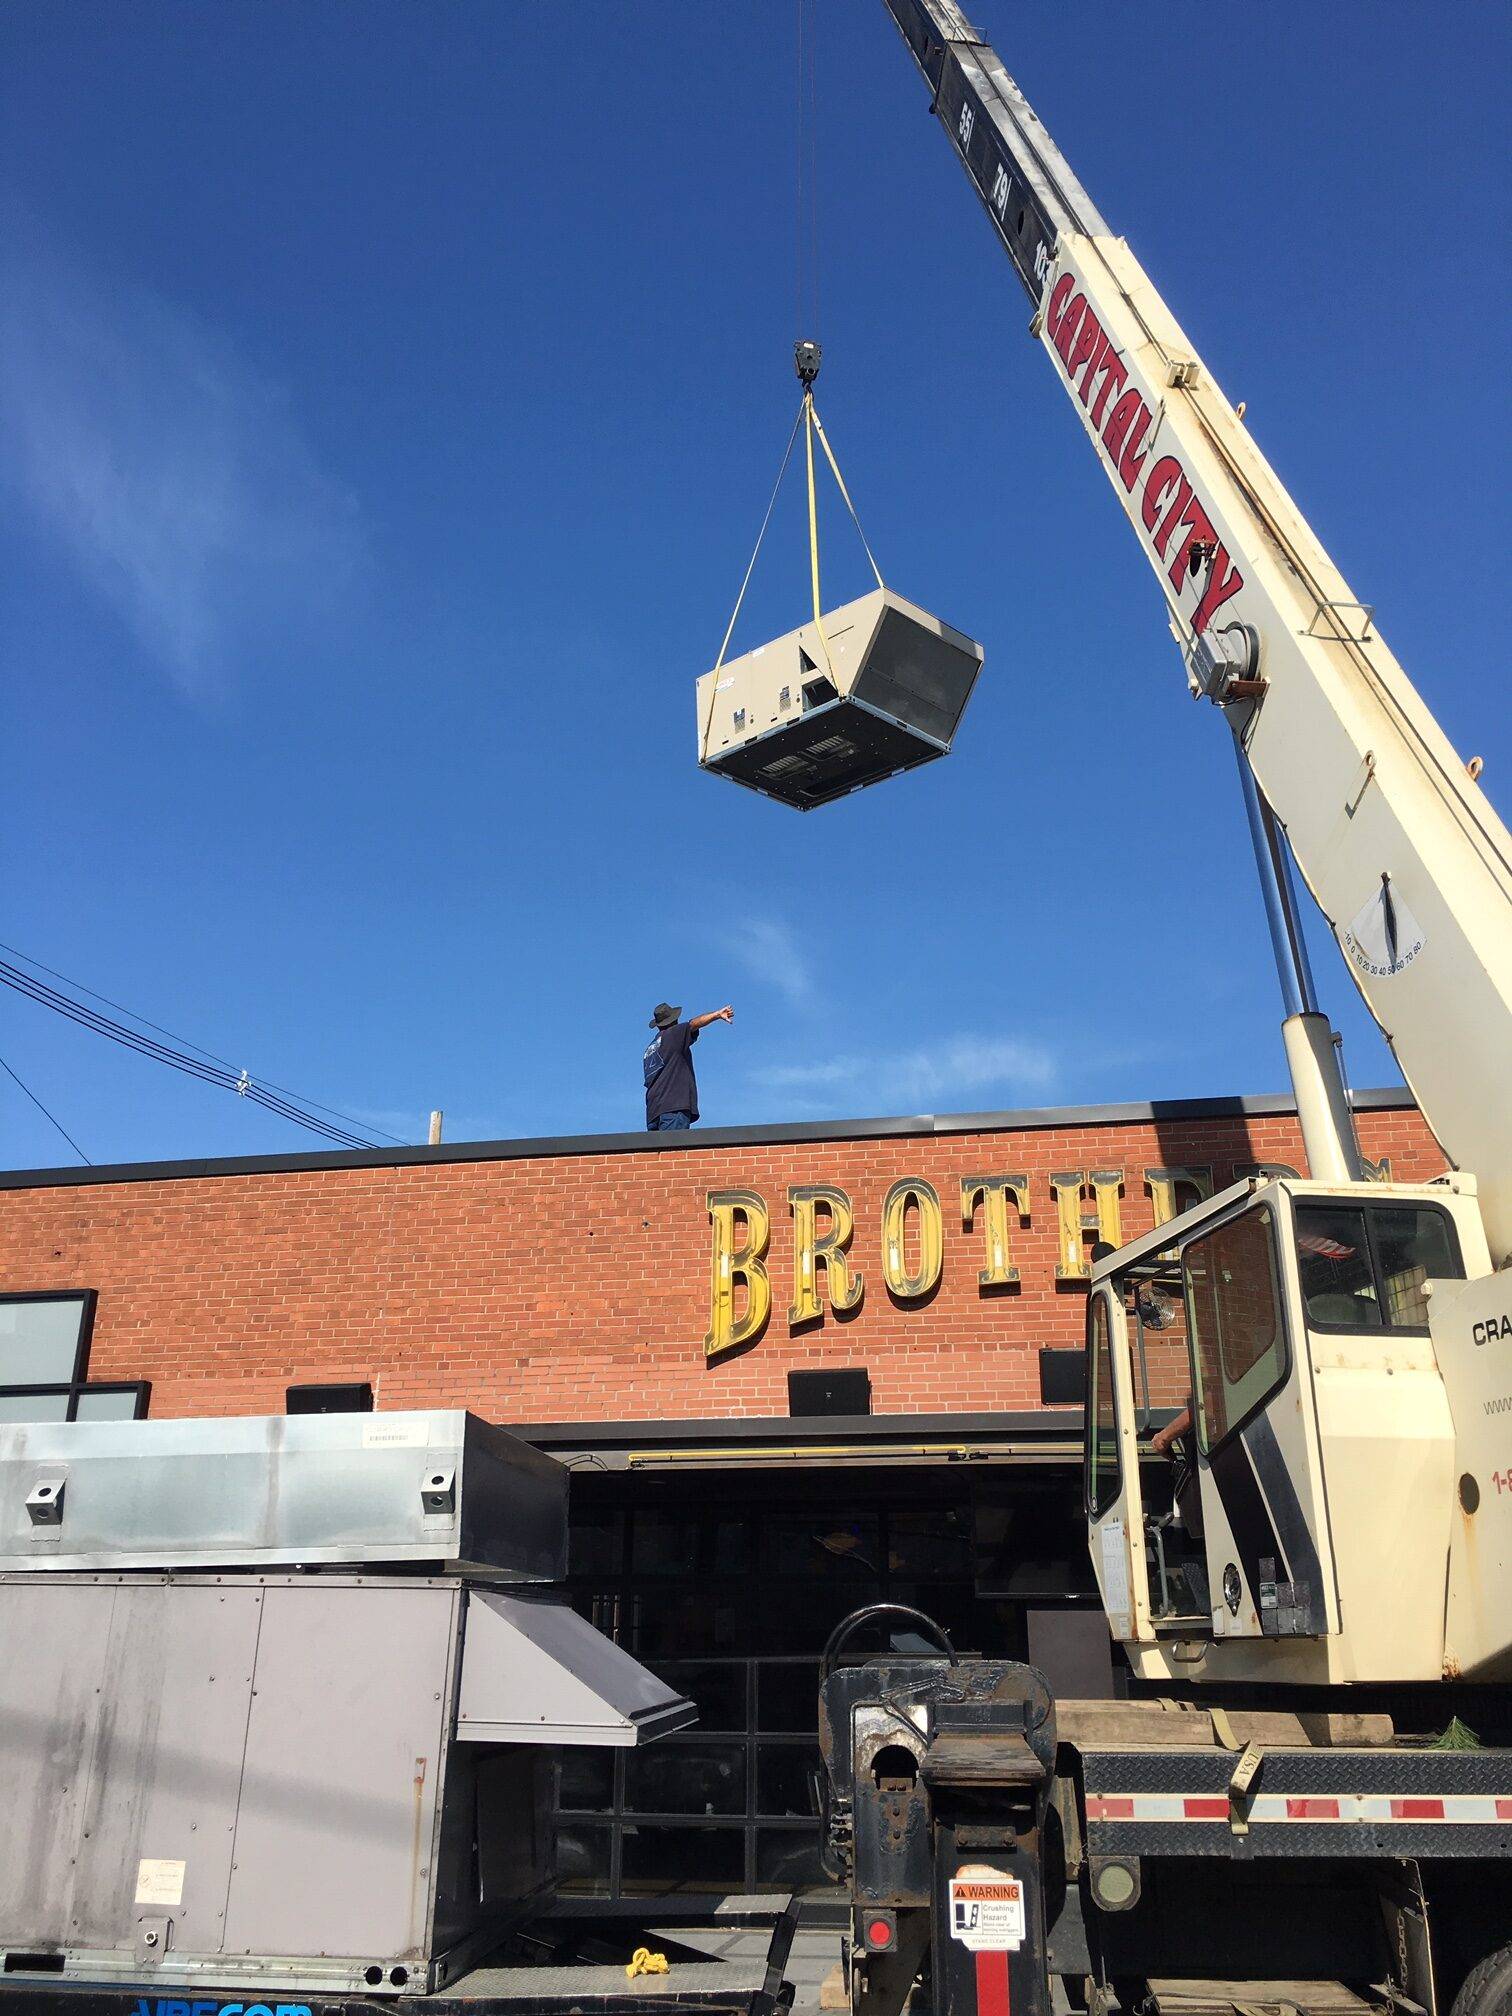 A 20-ton packaged rooftop unit being crane lifted onto a roof in downtown Columbus, Ohio